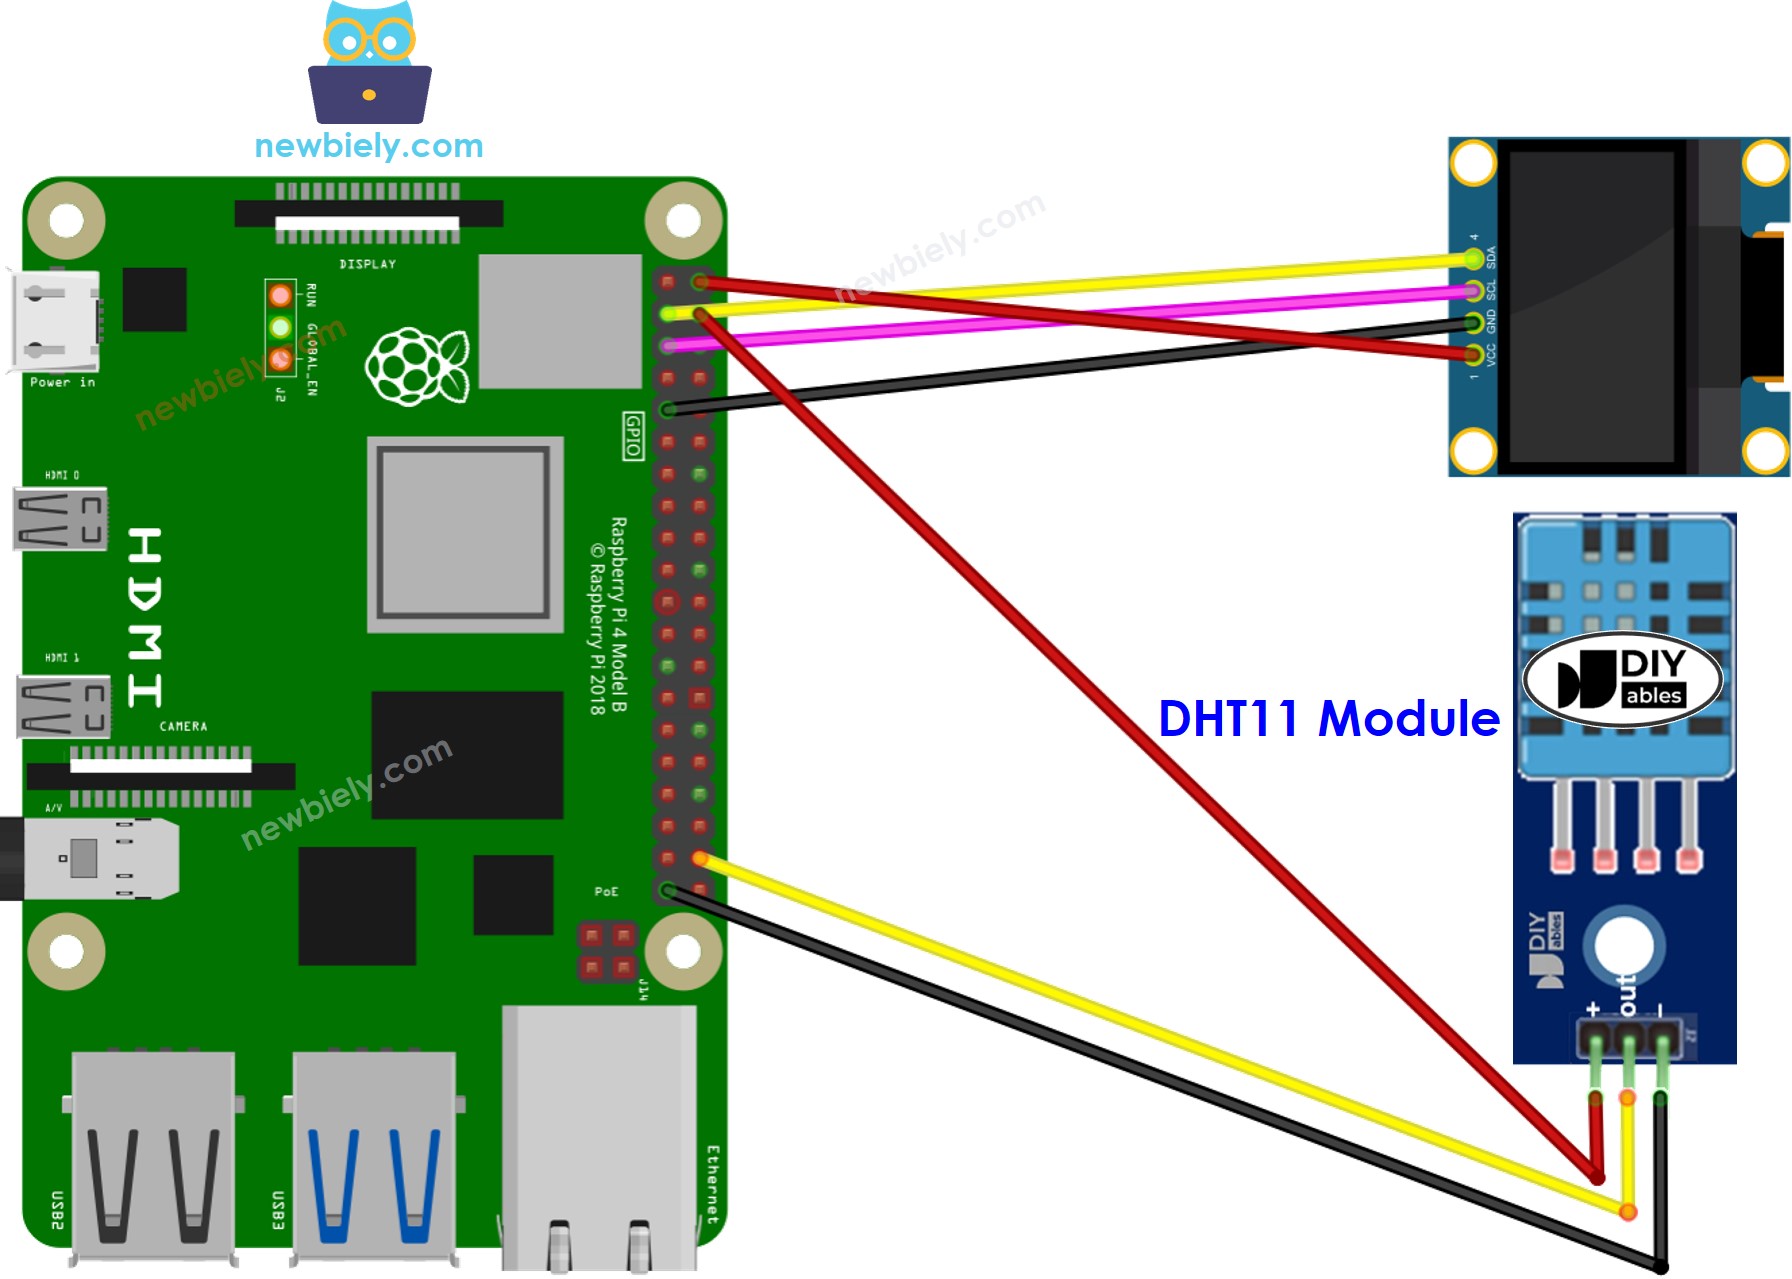 The wiring diagram between Raspberry Pi and DHT11 Sensor OLED